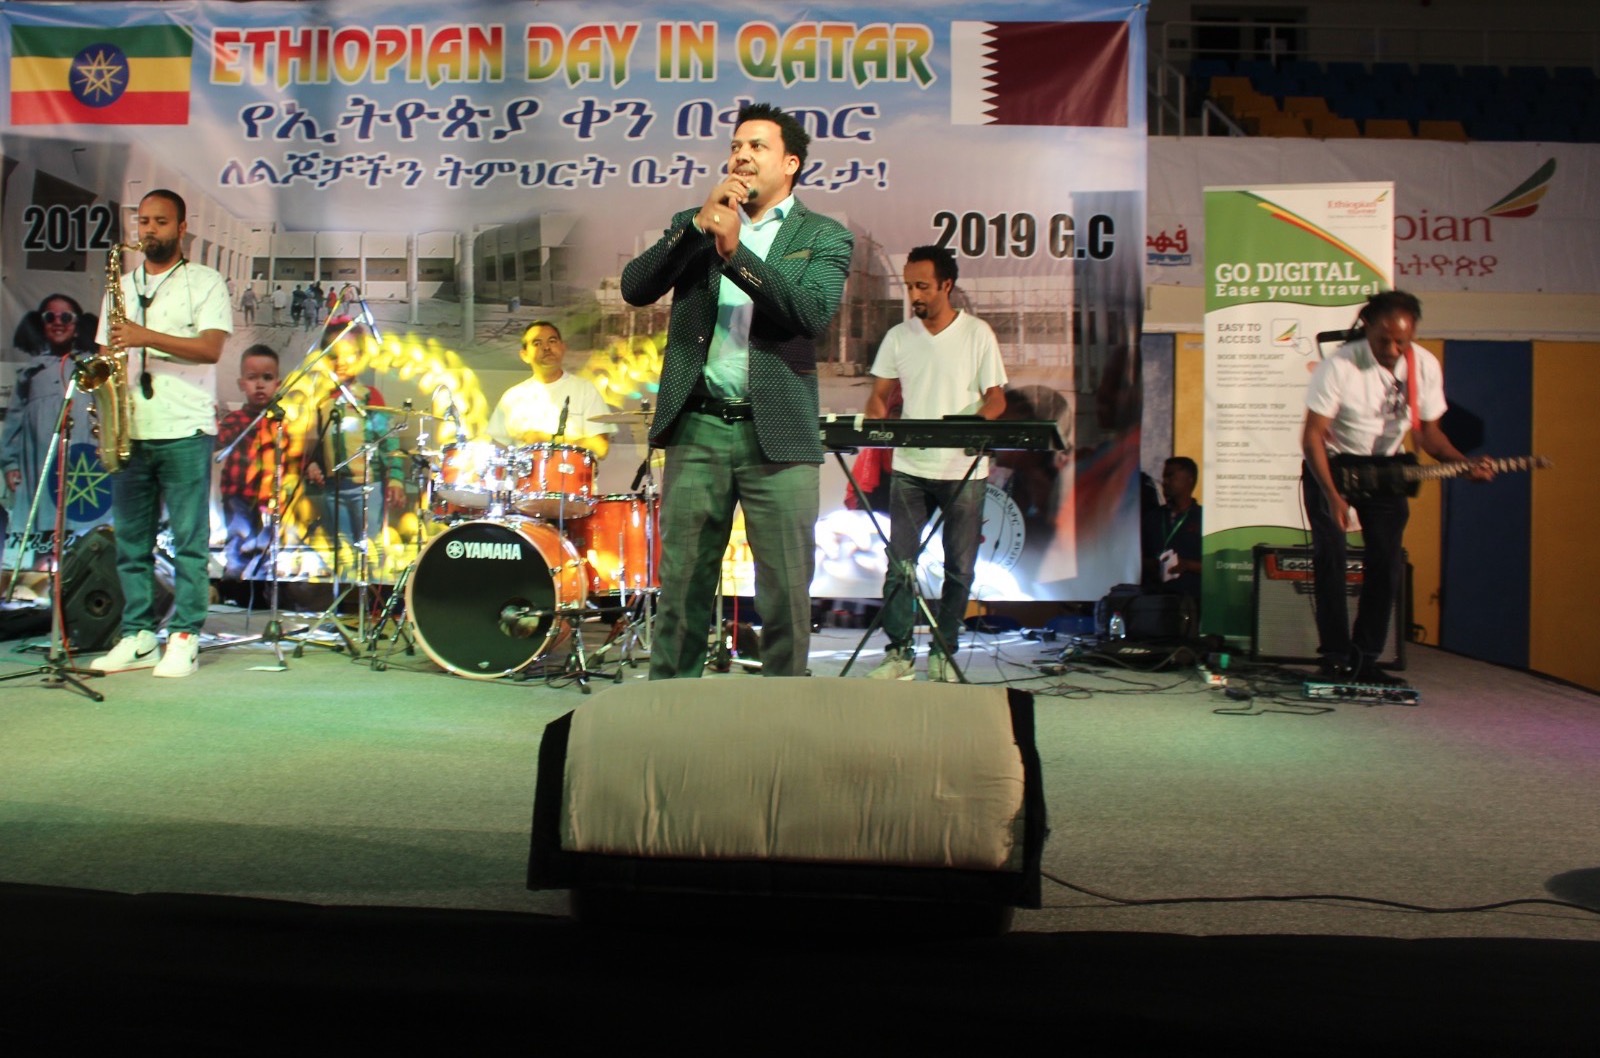 A Performance At The Event 